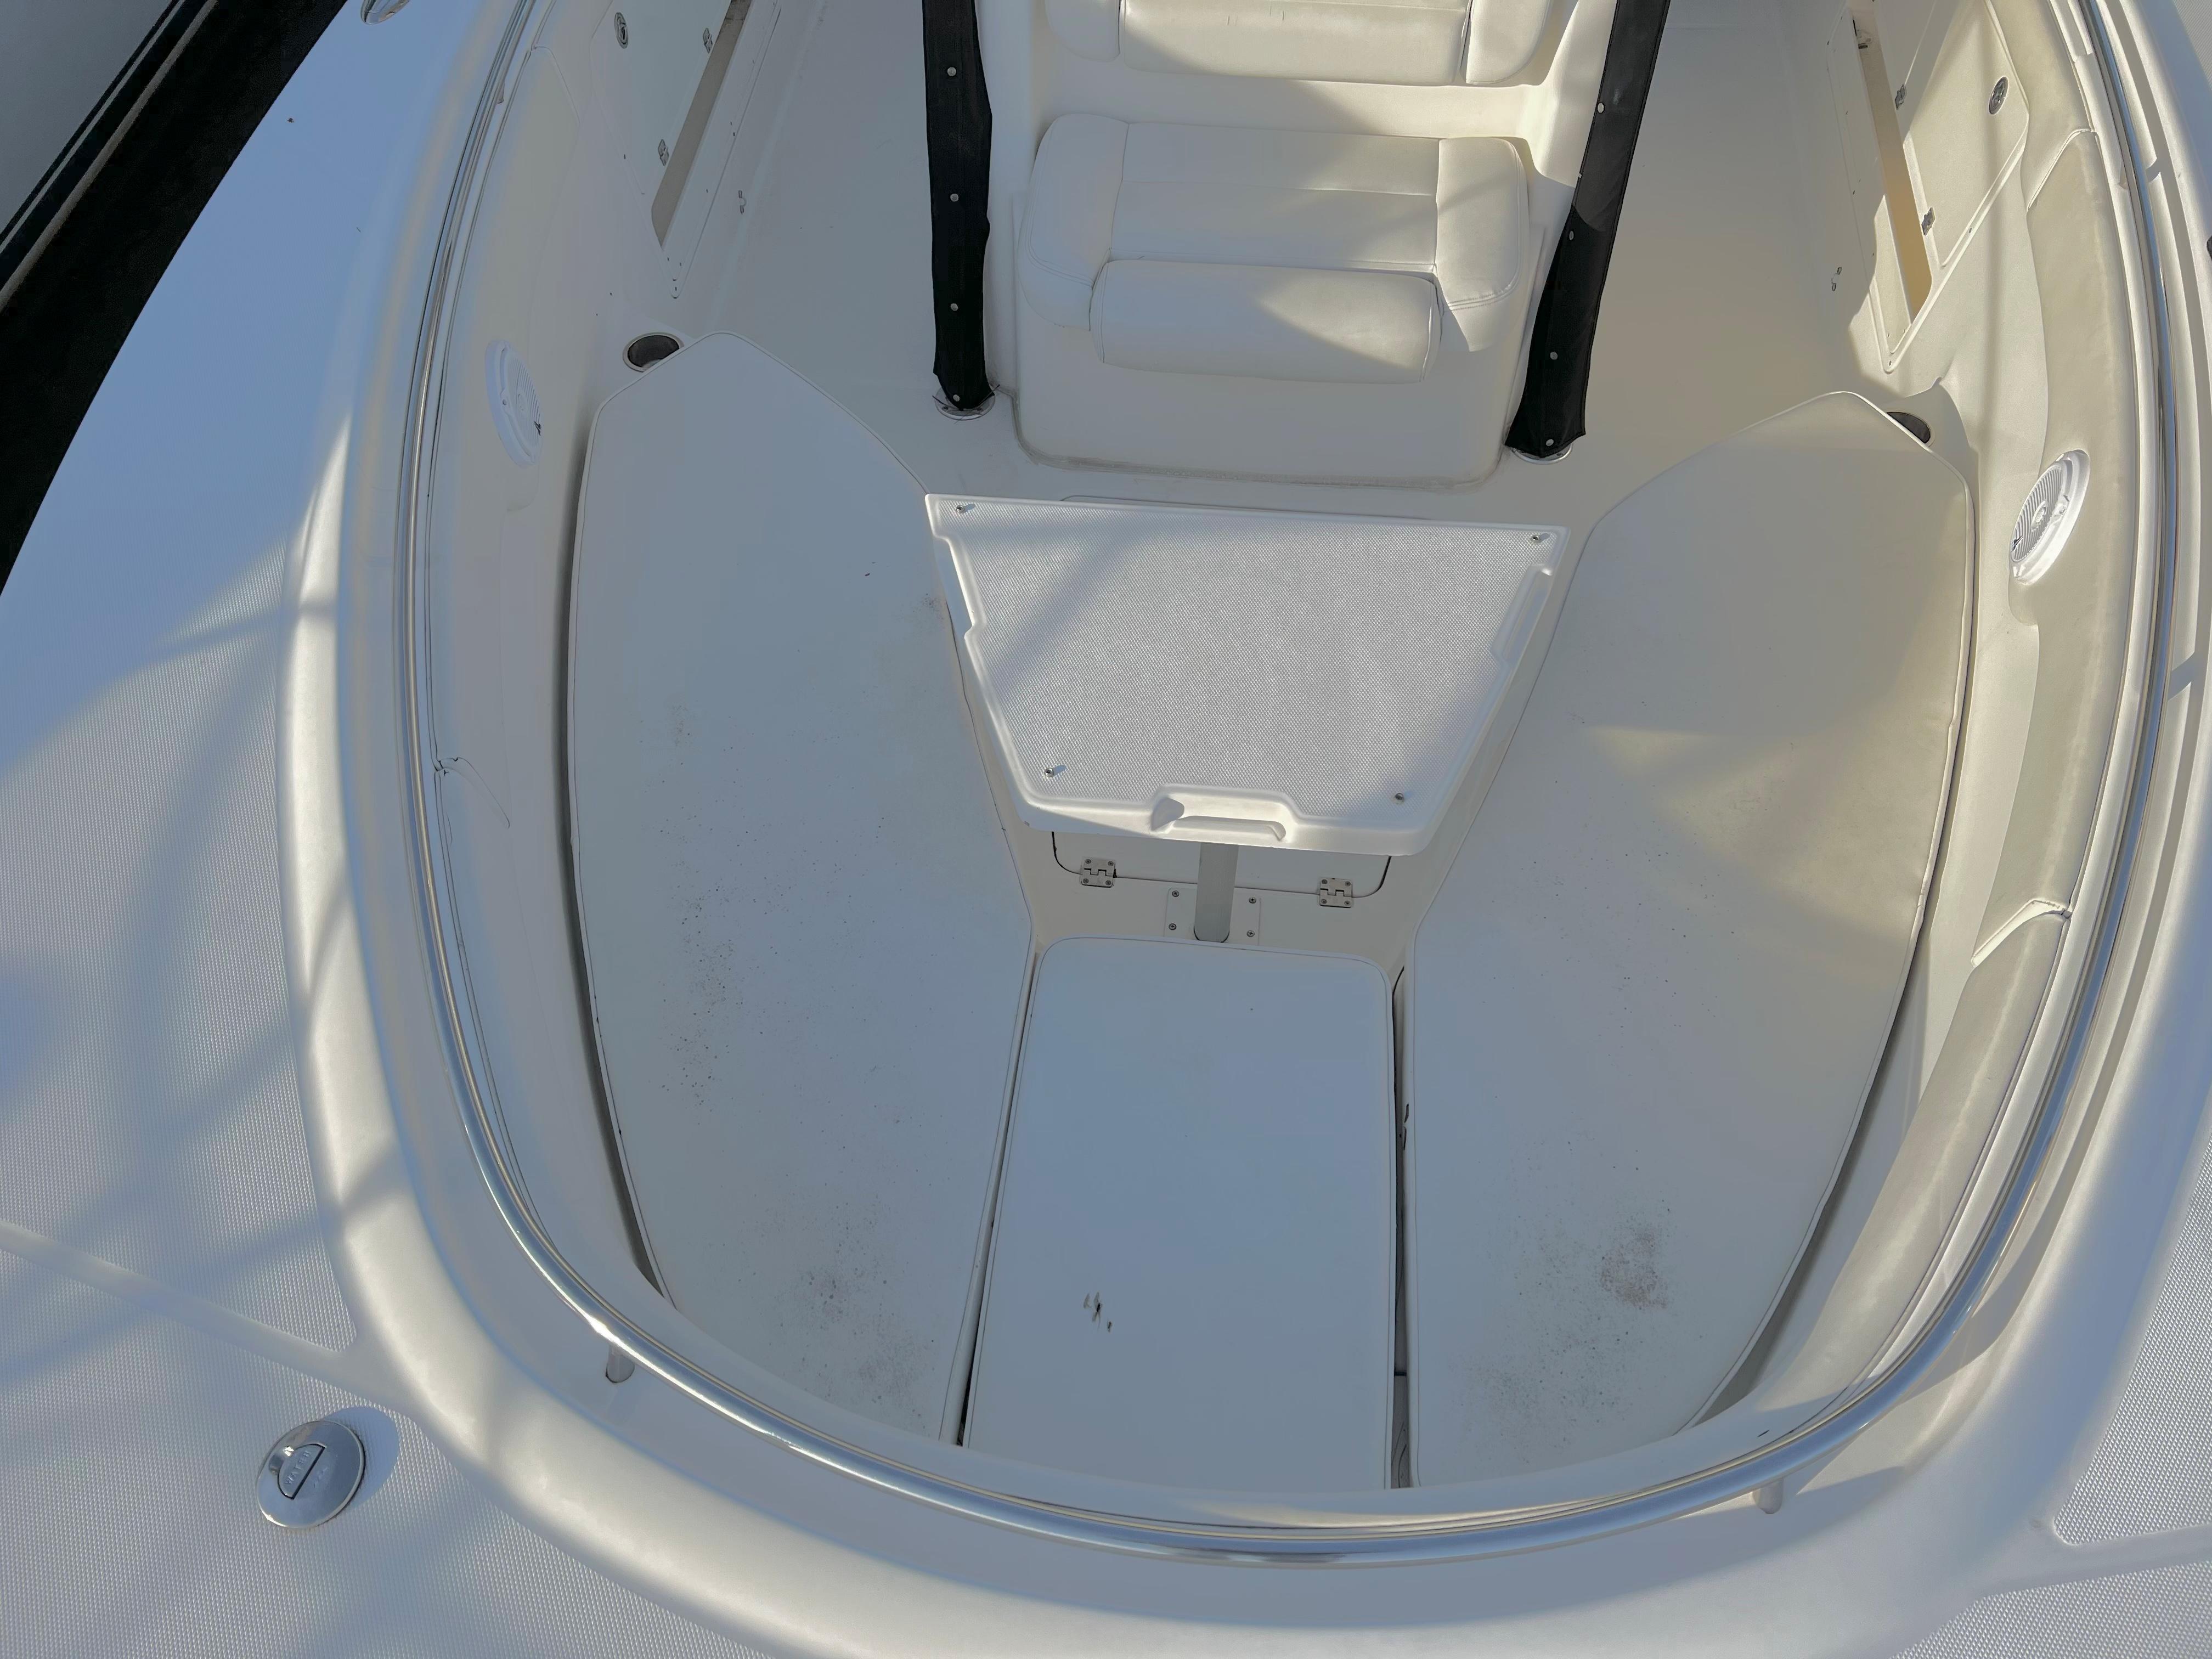 2008 Robalo R300 Center Console For Sale | YaZu Yachting | Deltaville